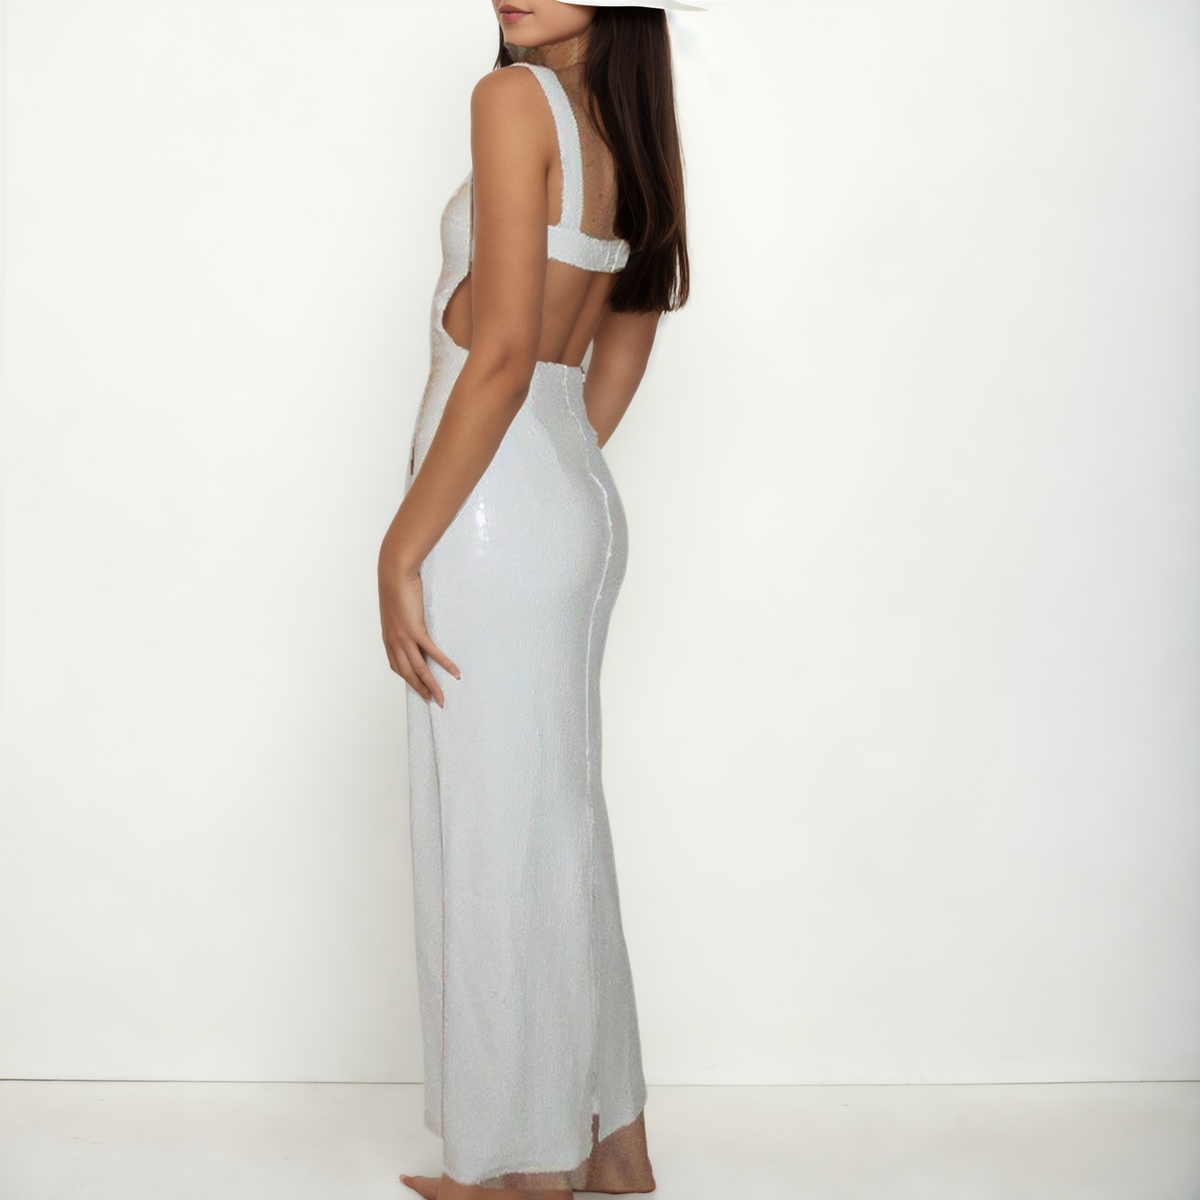 Luxe Sequin Gala: Sling Square Collar Backless Party Dress-Maxi Dress-StylinArts